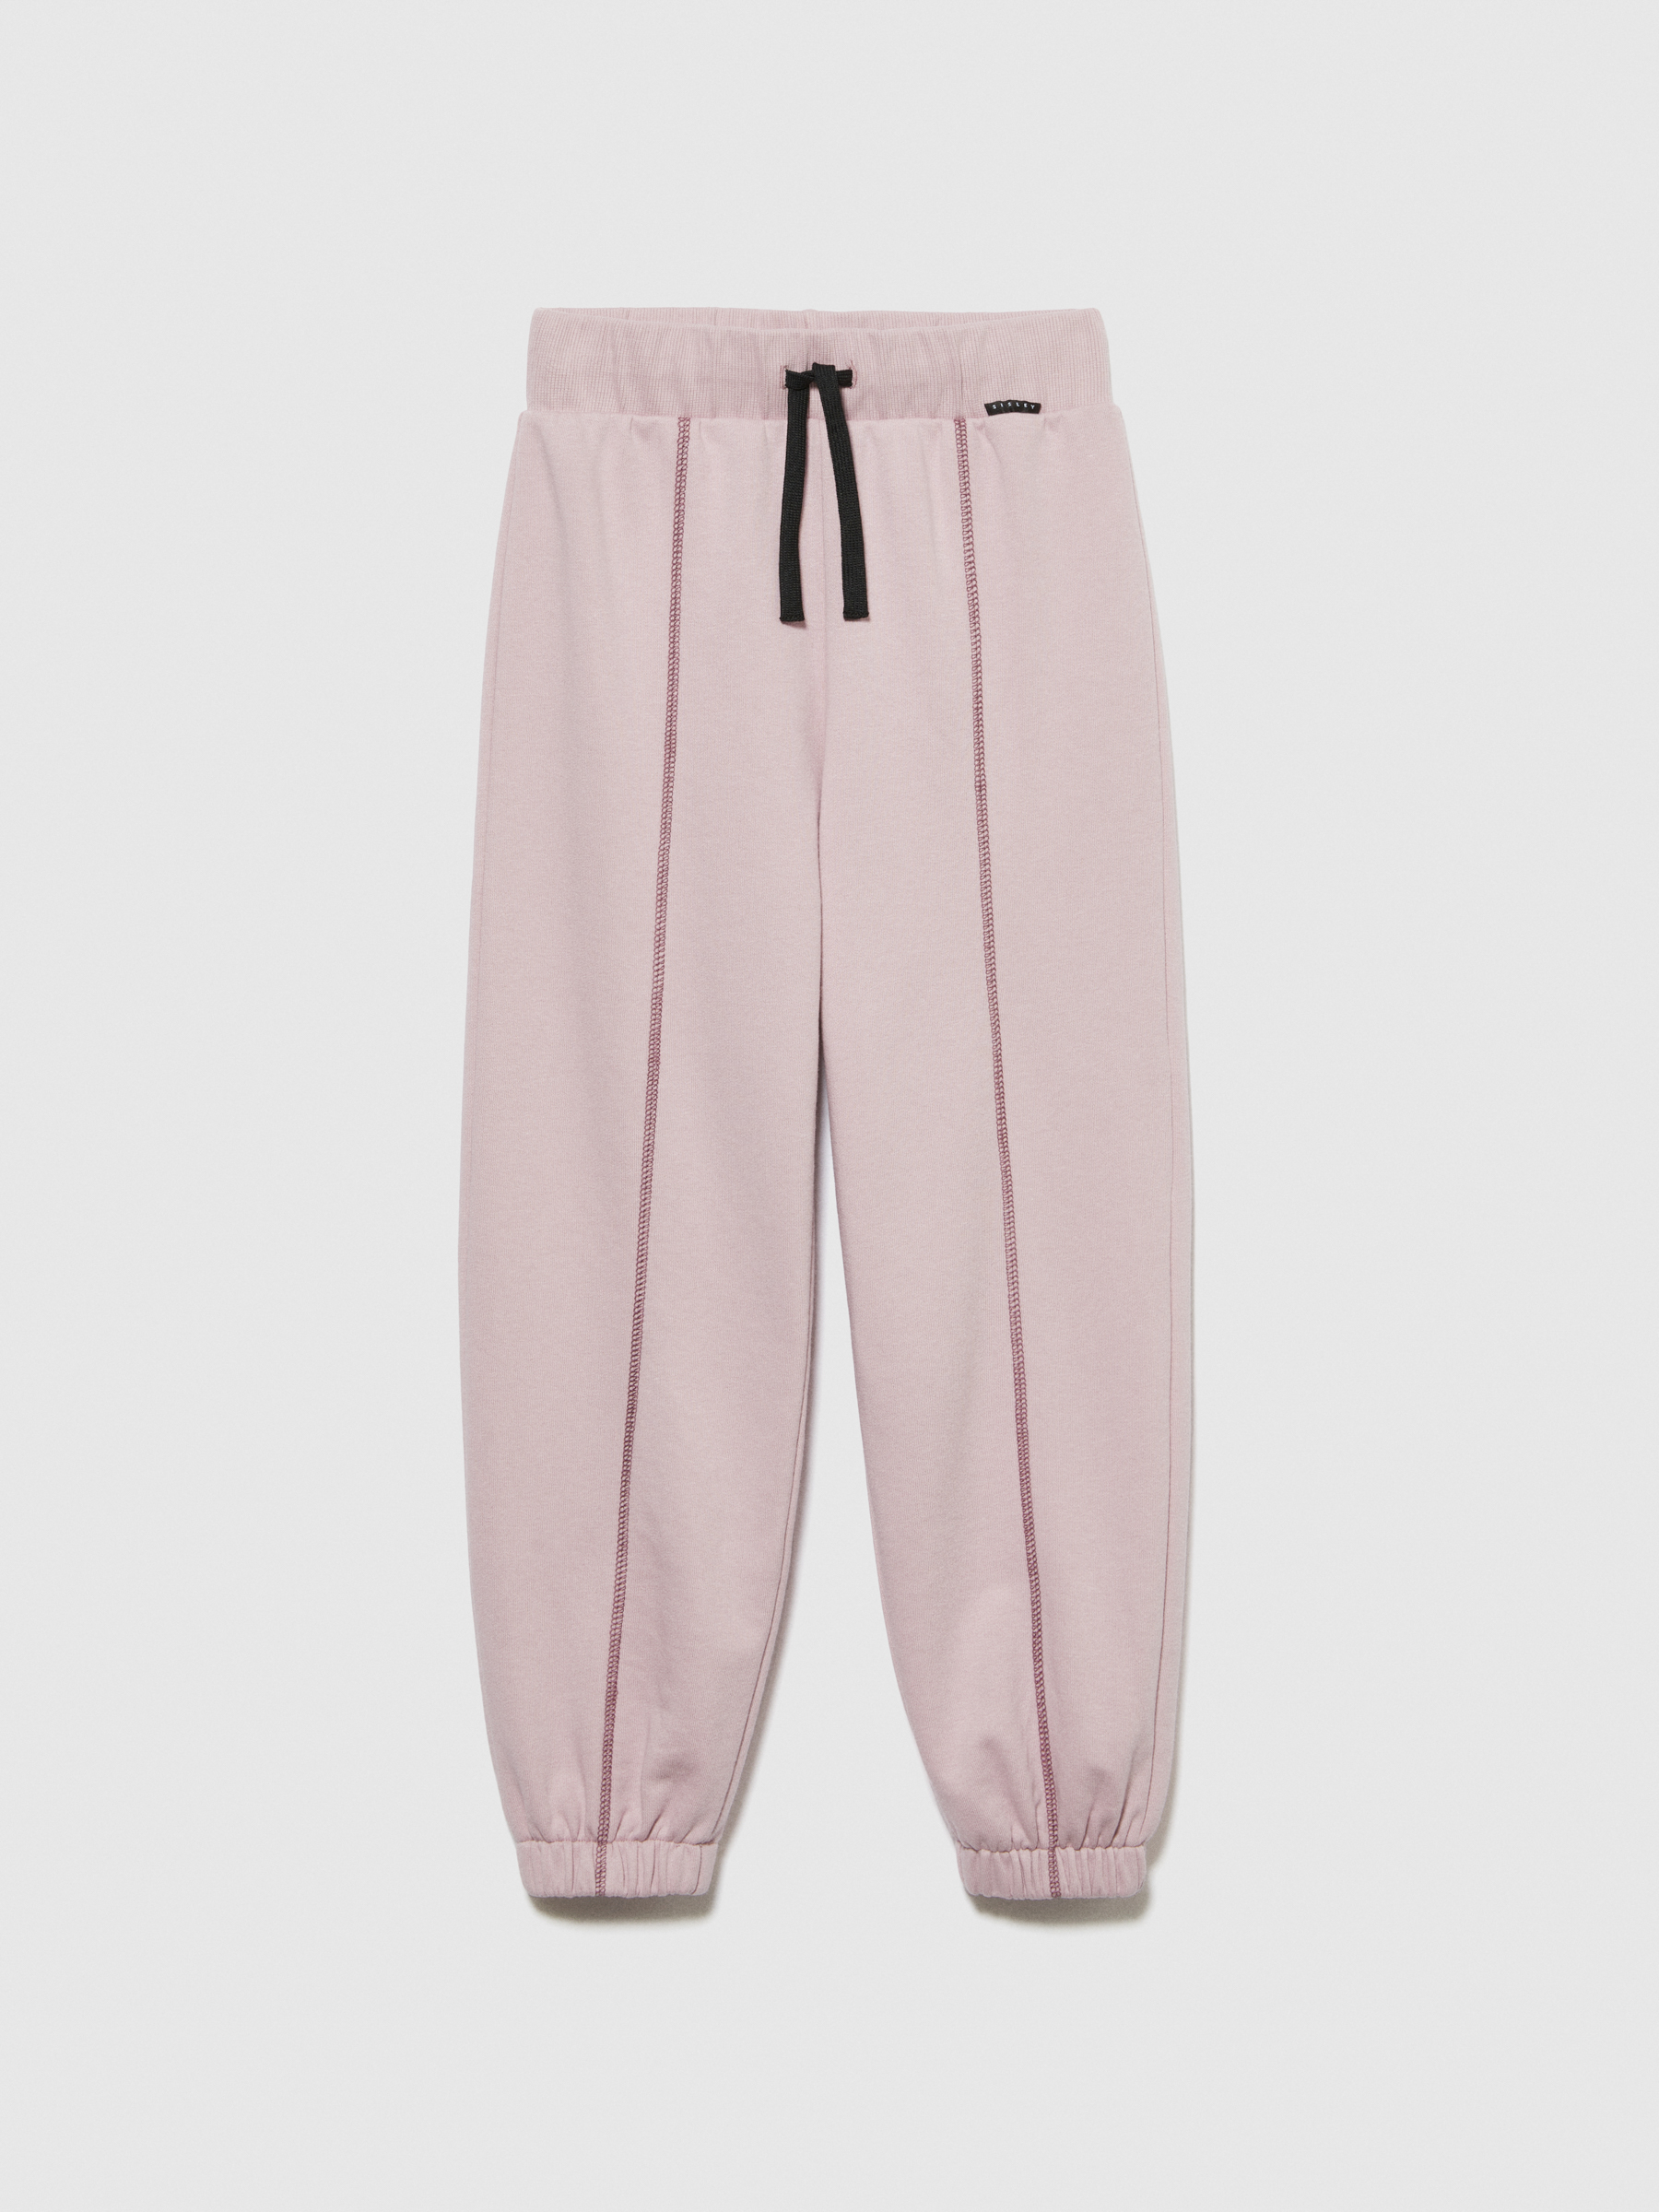 Sisley Young - Oversized Fit Joggers, Woman, Pink, Size: KL